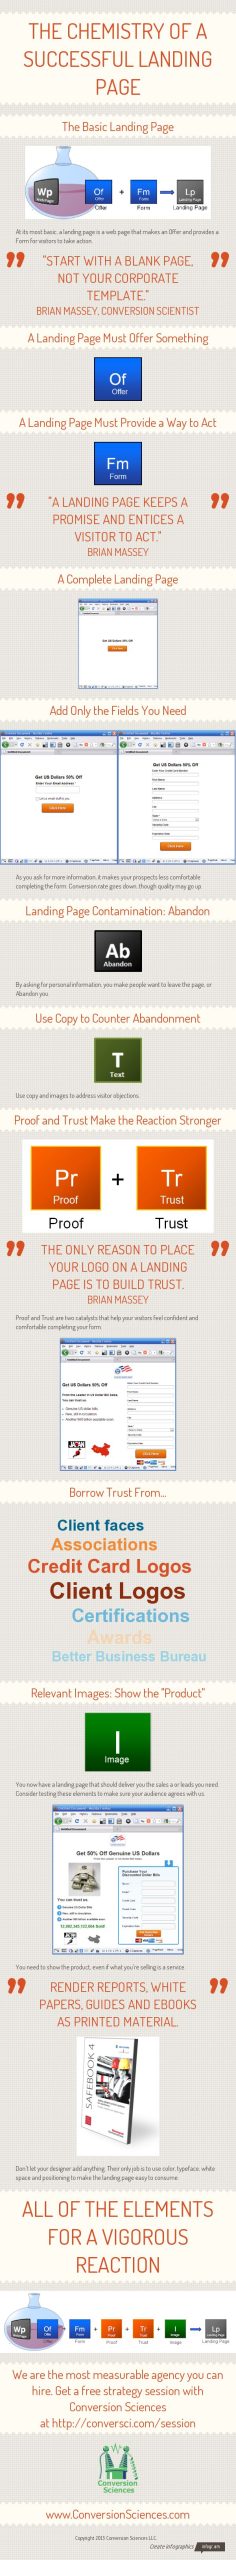 [Infographic] The Chemistry of a Successful Landing Page